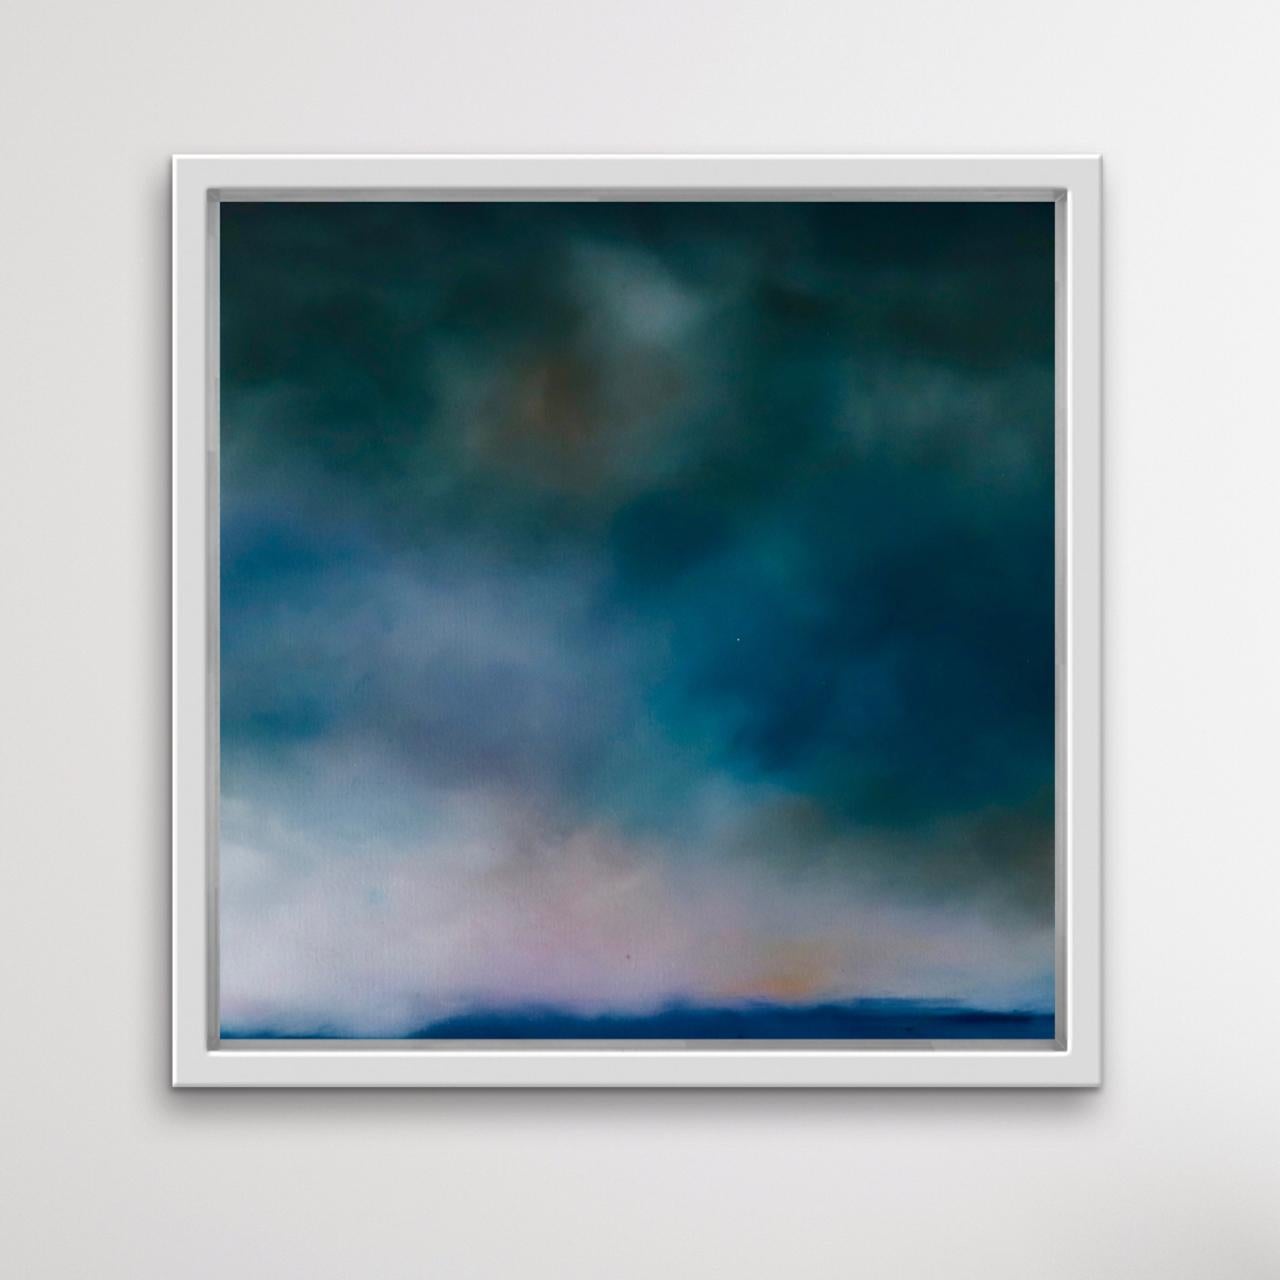 Say It Again is an original oil painting by Sophie Berger. The varying light and dark tones are effortlessly married together by Berger’s painting style to create an atmospheric piece. This piece is based on the ever-changing skies and unpredictable